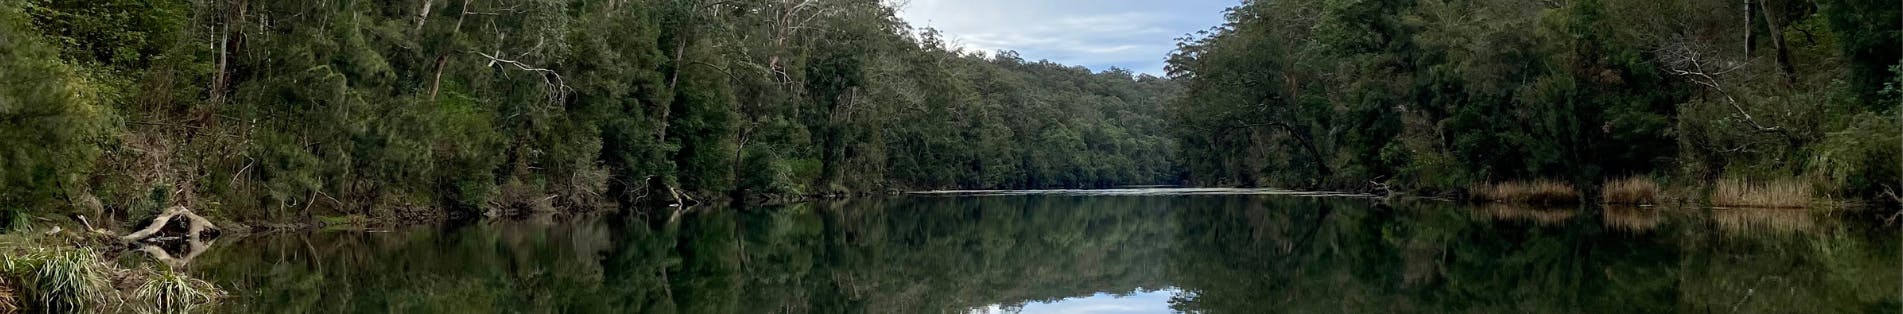 Image of Clyde River, NSW